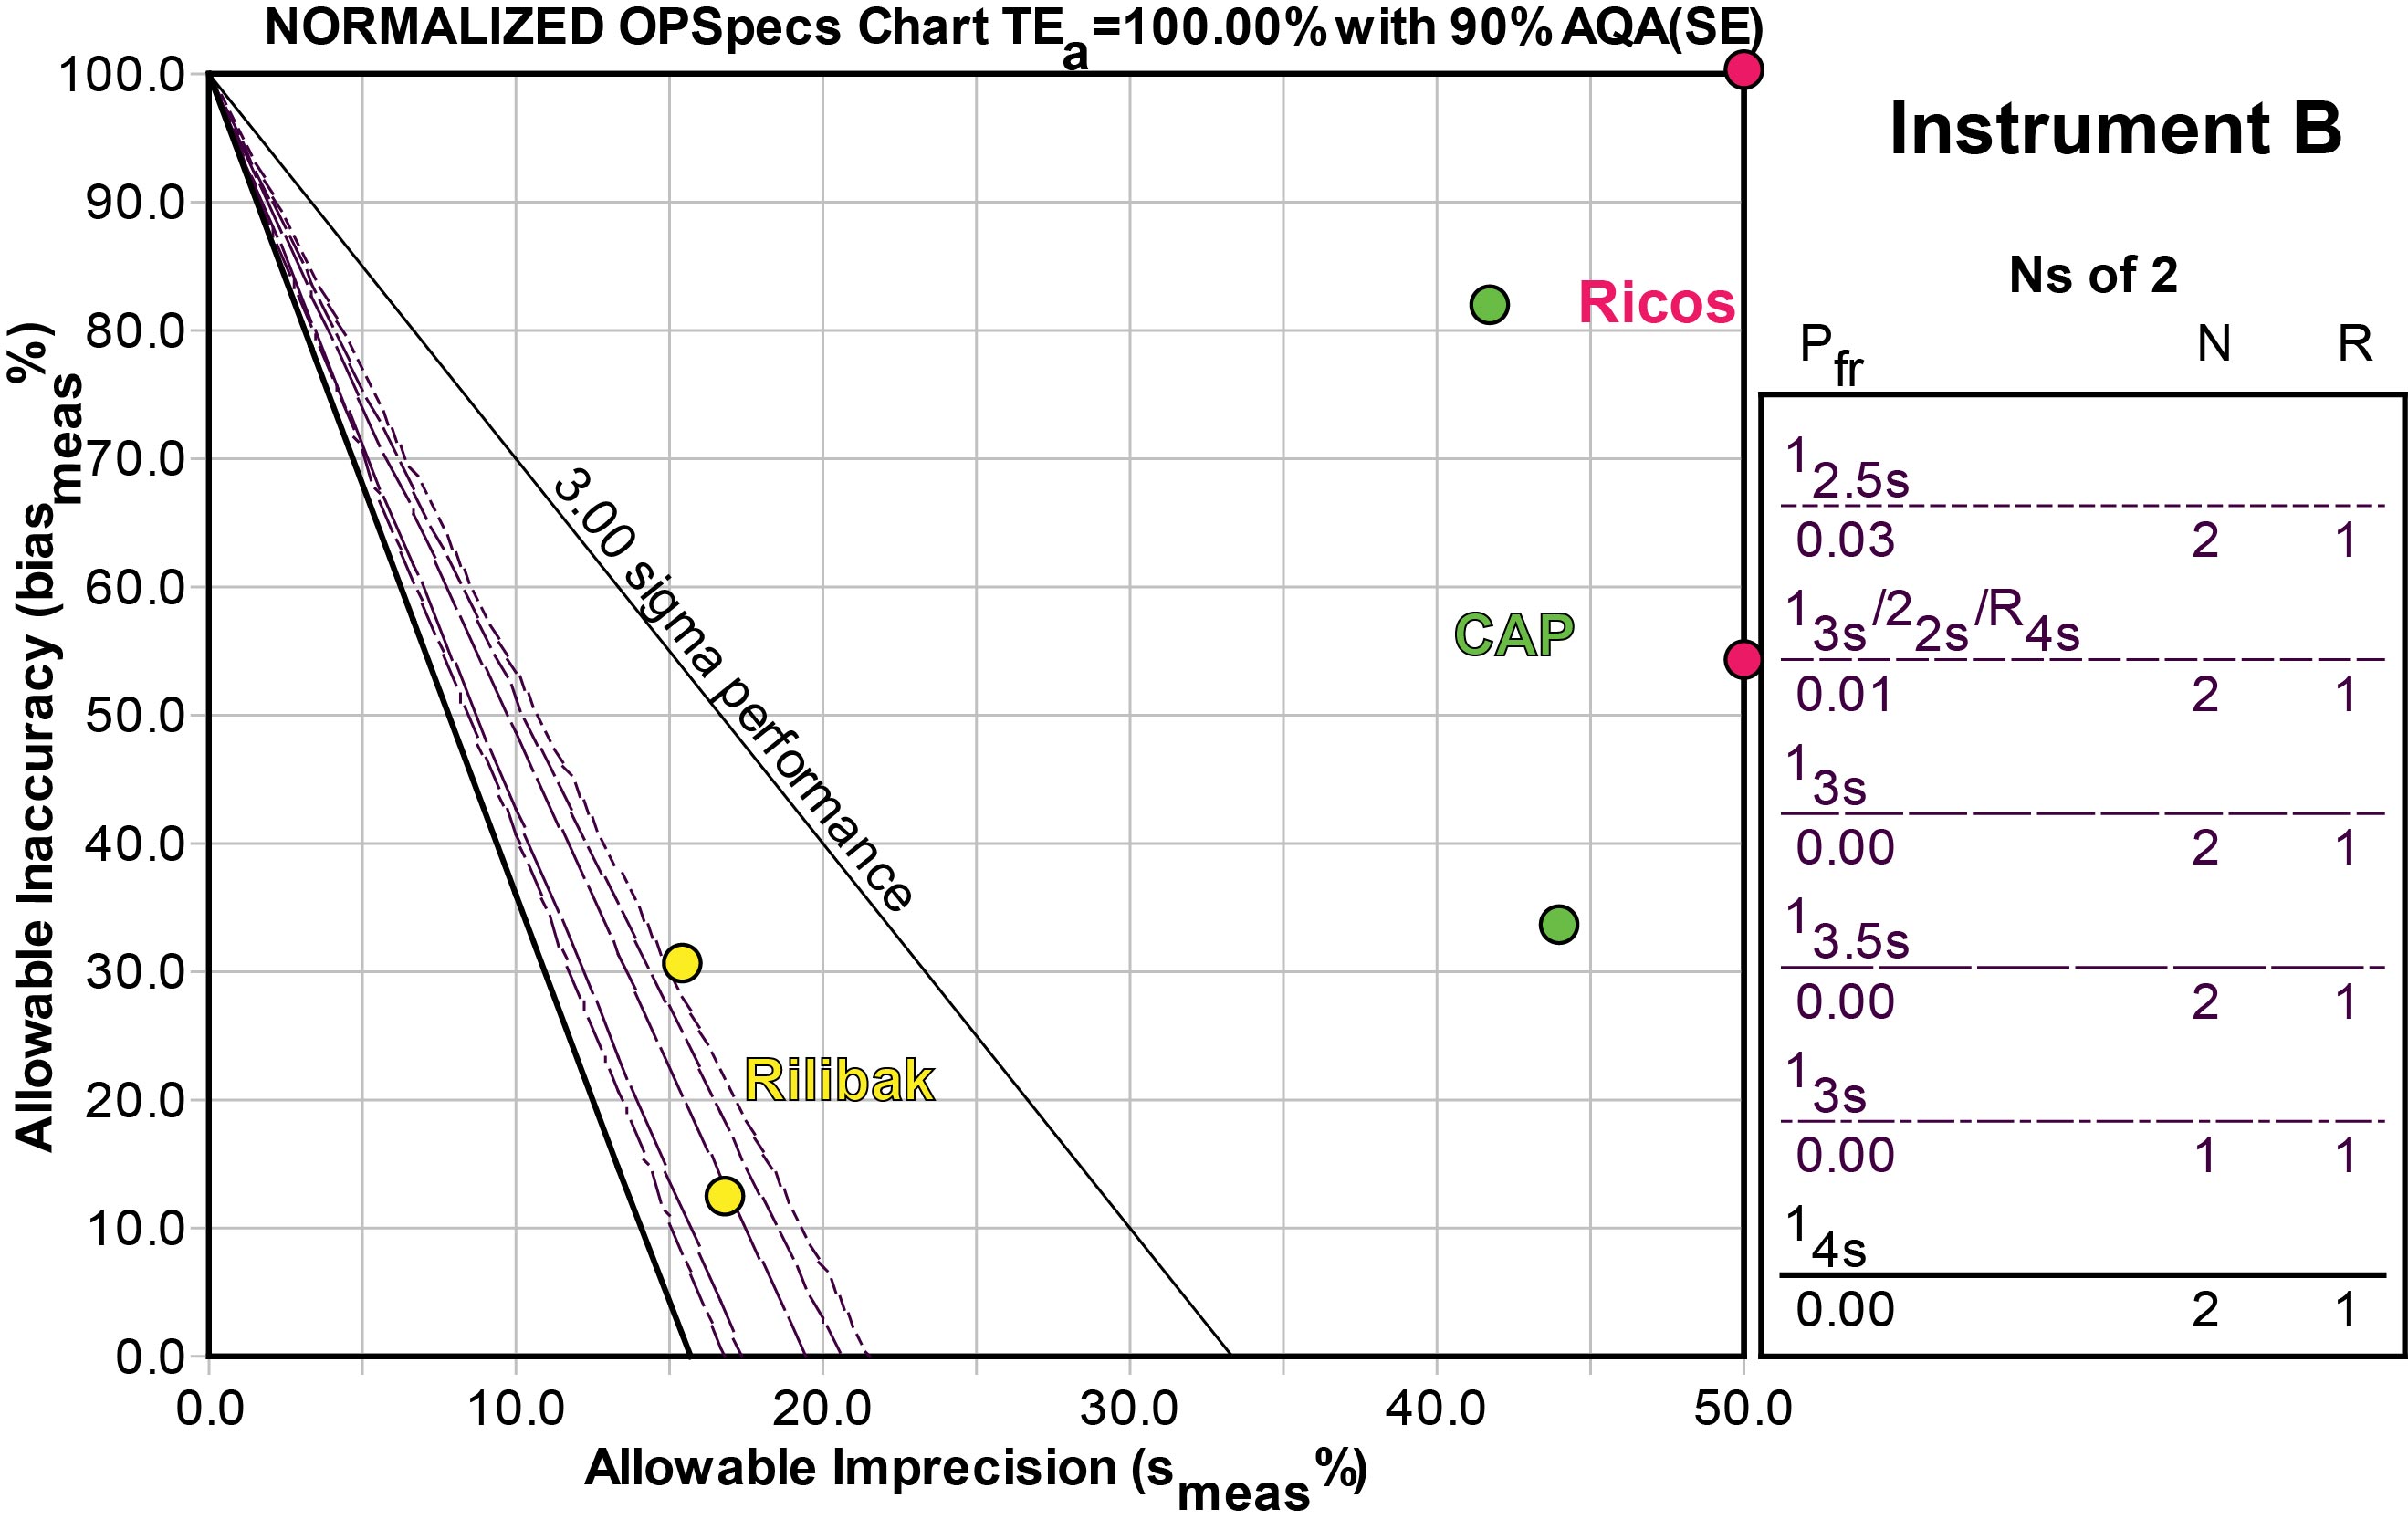 2012-HbA1c-Normalized OPSpecs chart for Method B